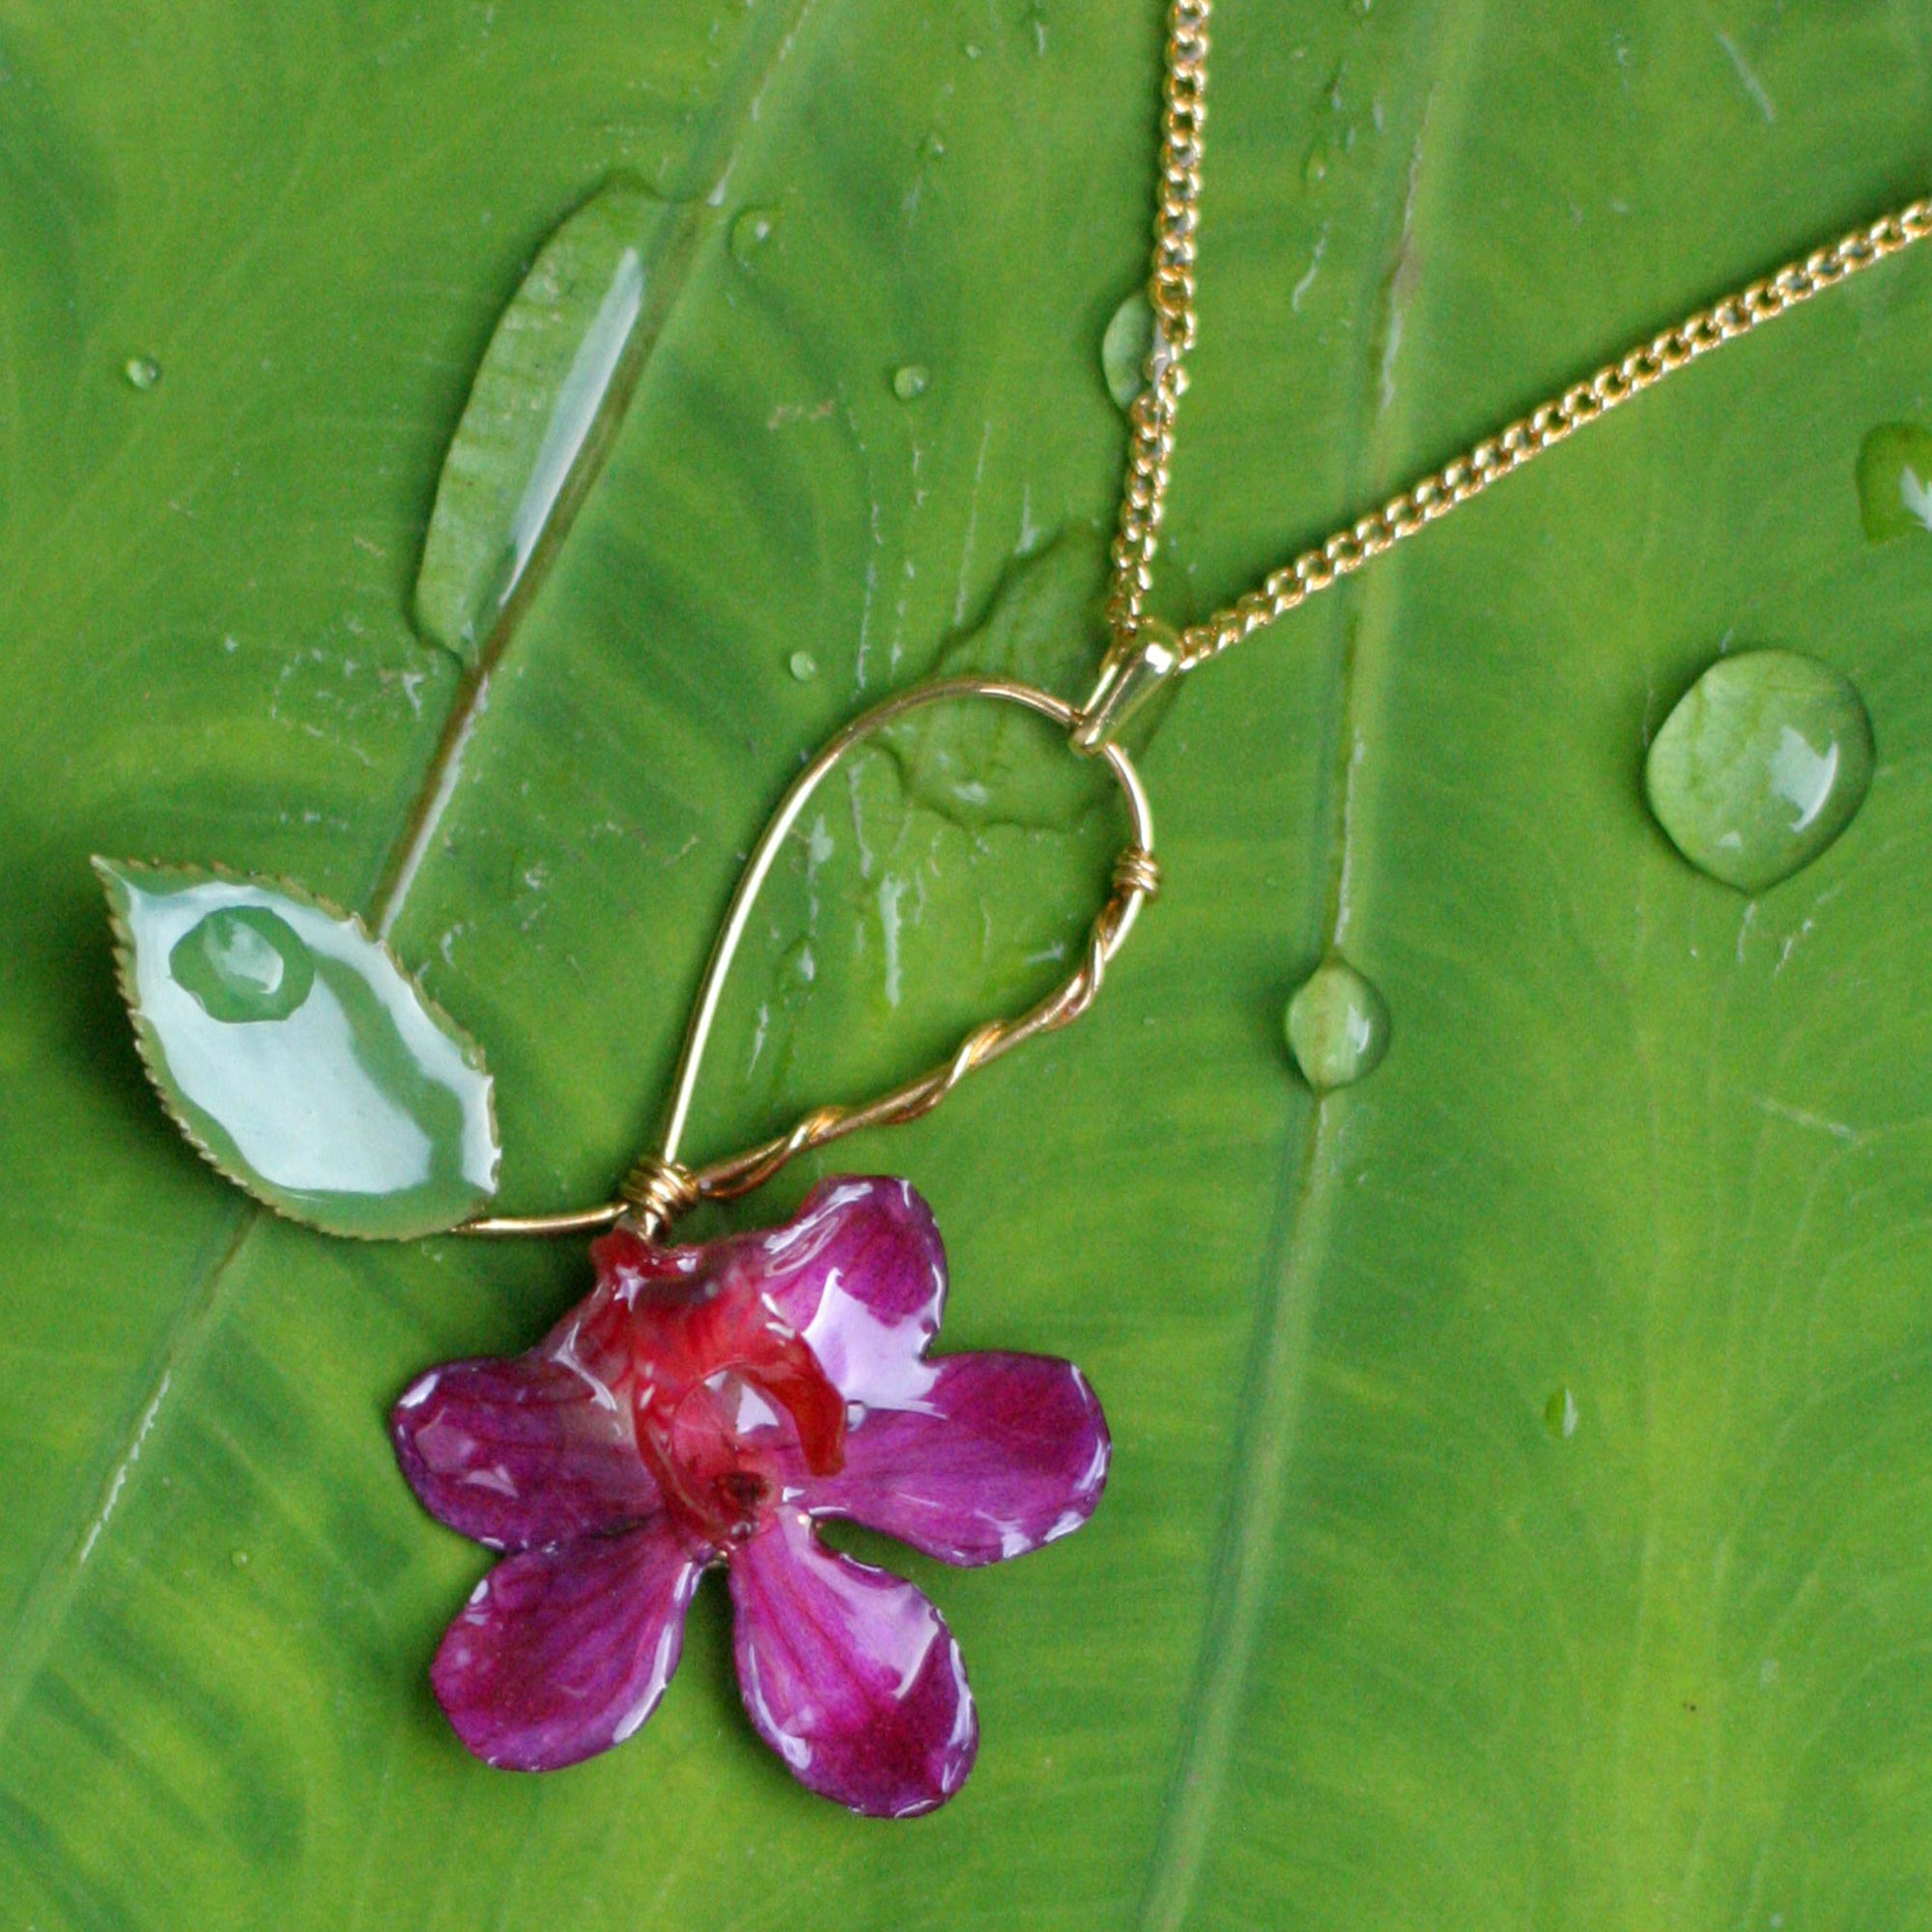 Artisan Crafted Natural Flower Pendant Necklace, 'Sublime' Real orchid 24 carat gold-plated chain Handcrafted Jewelry